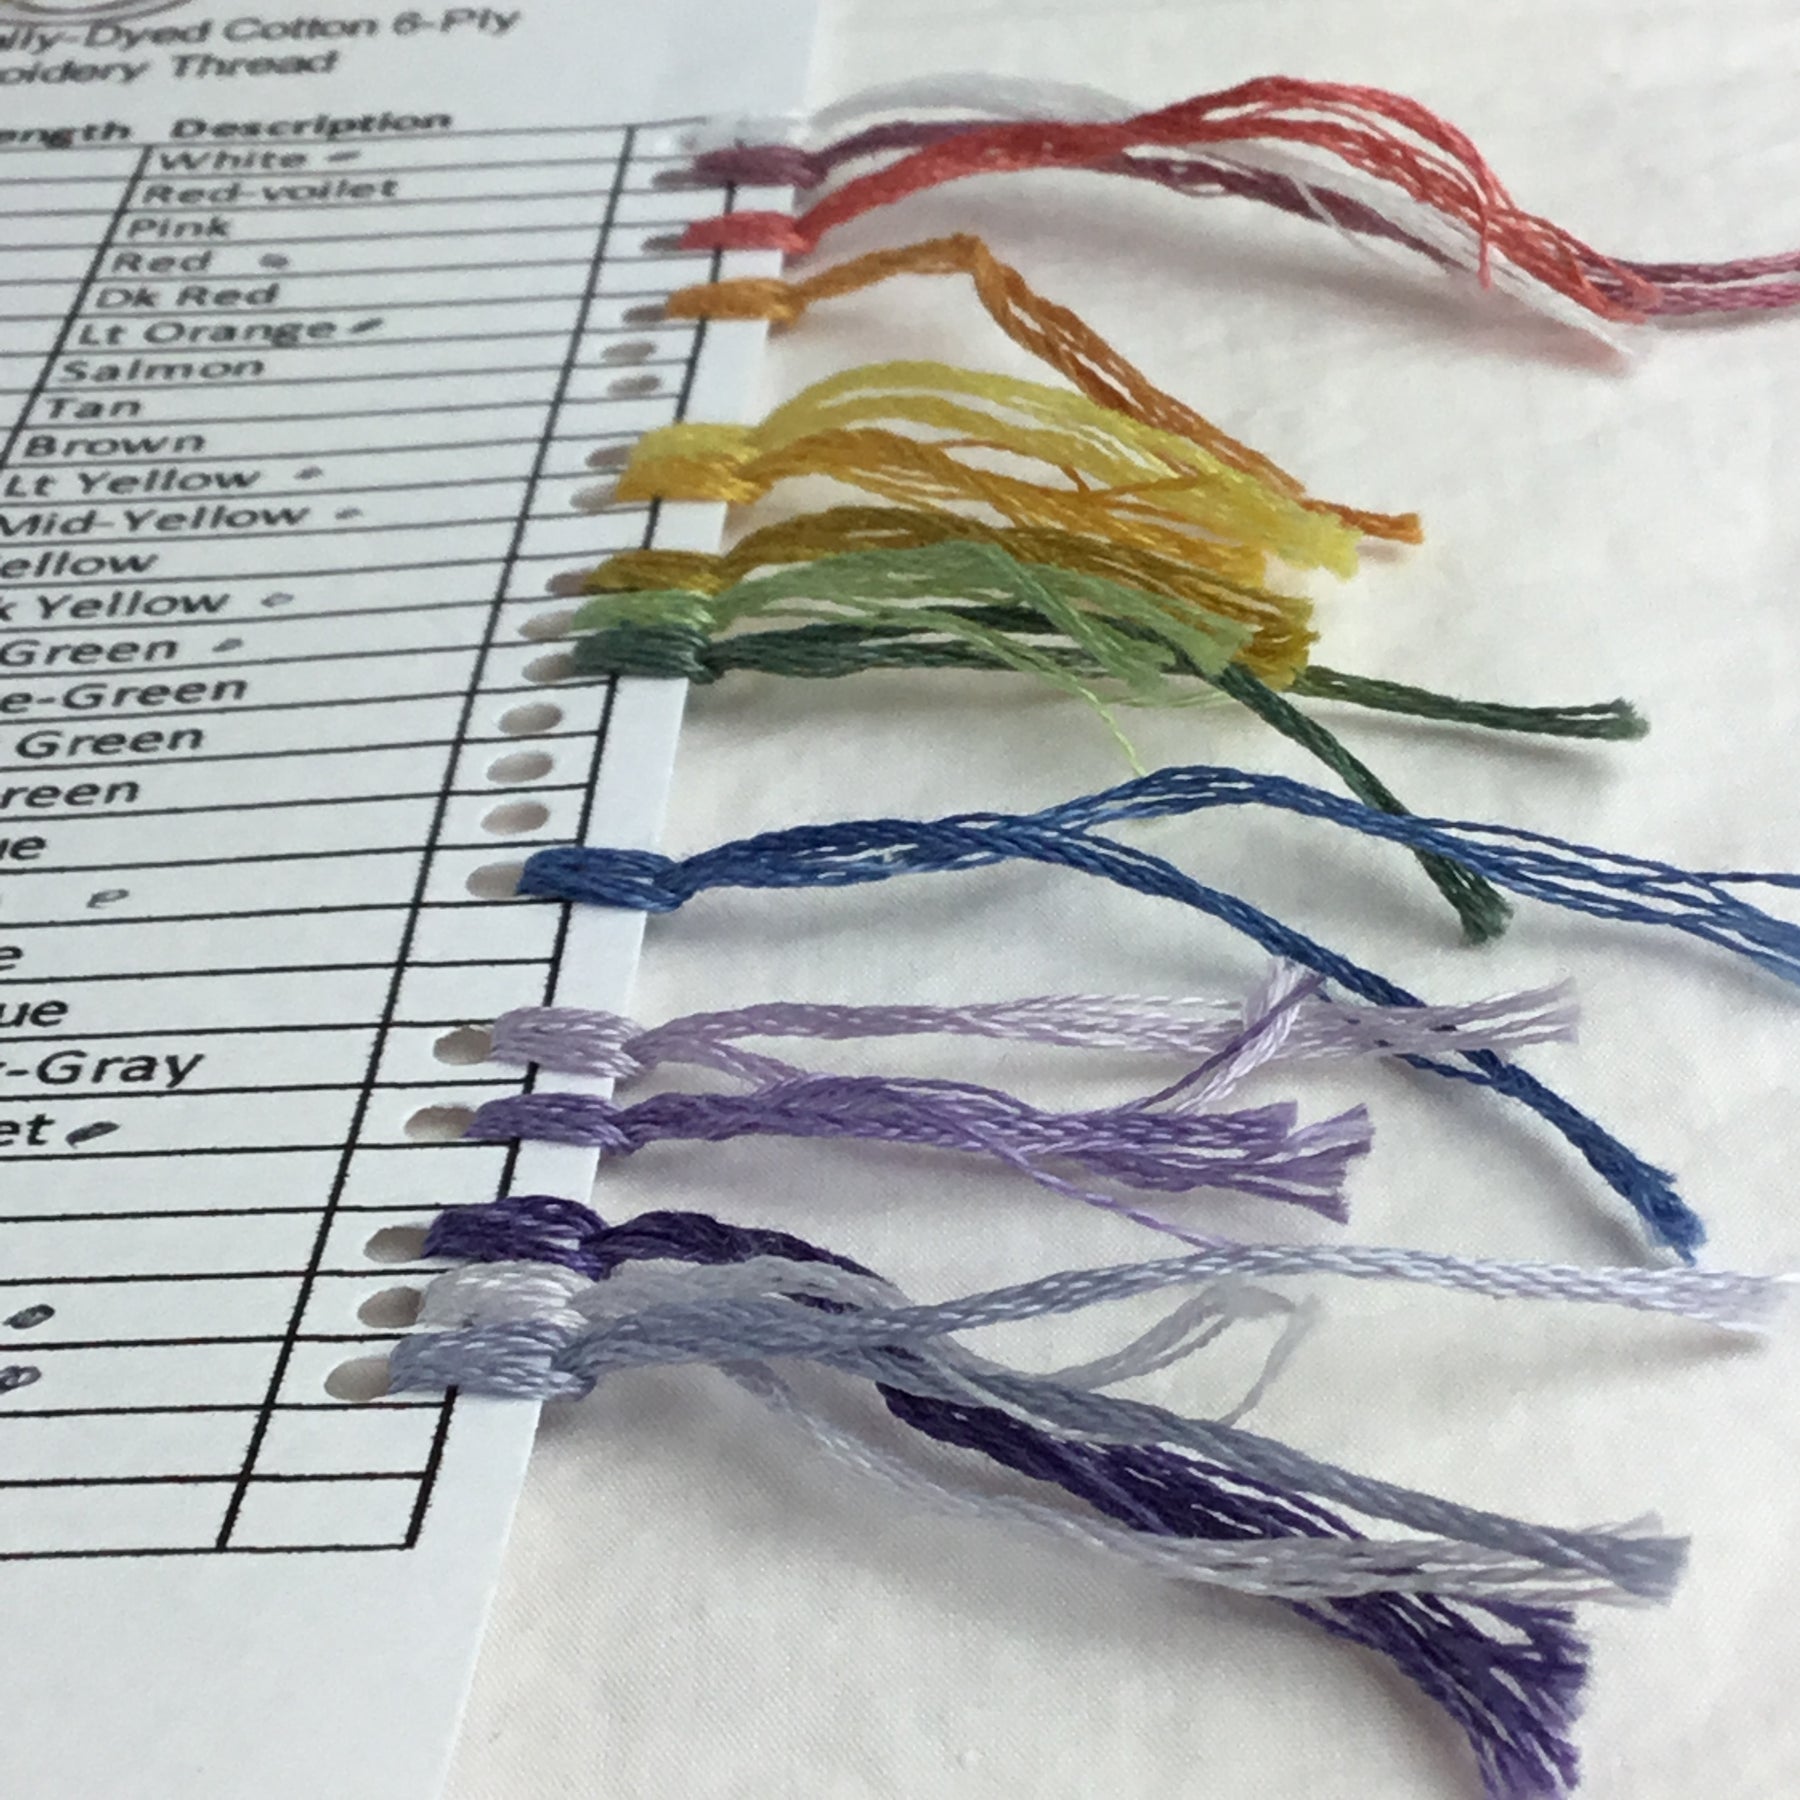 Wholesale FINGERINSPIRE 36 Pcs 6 Styles Wood Embroidery Floss